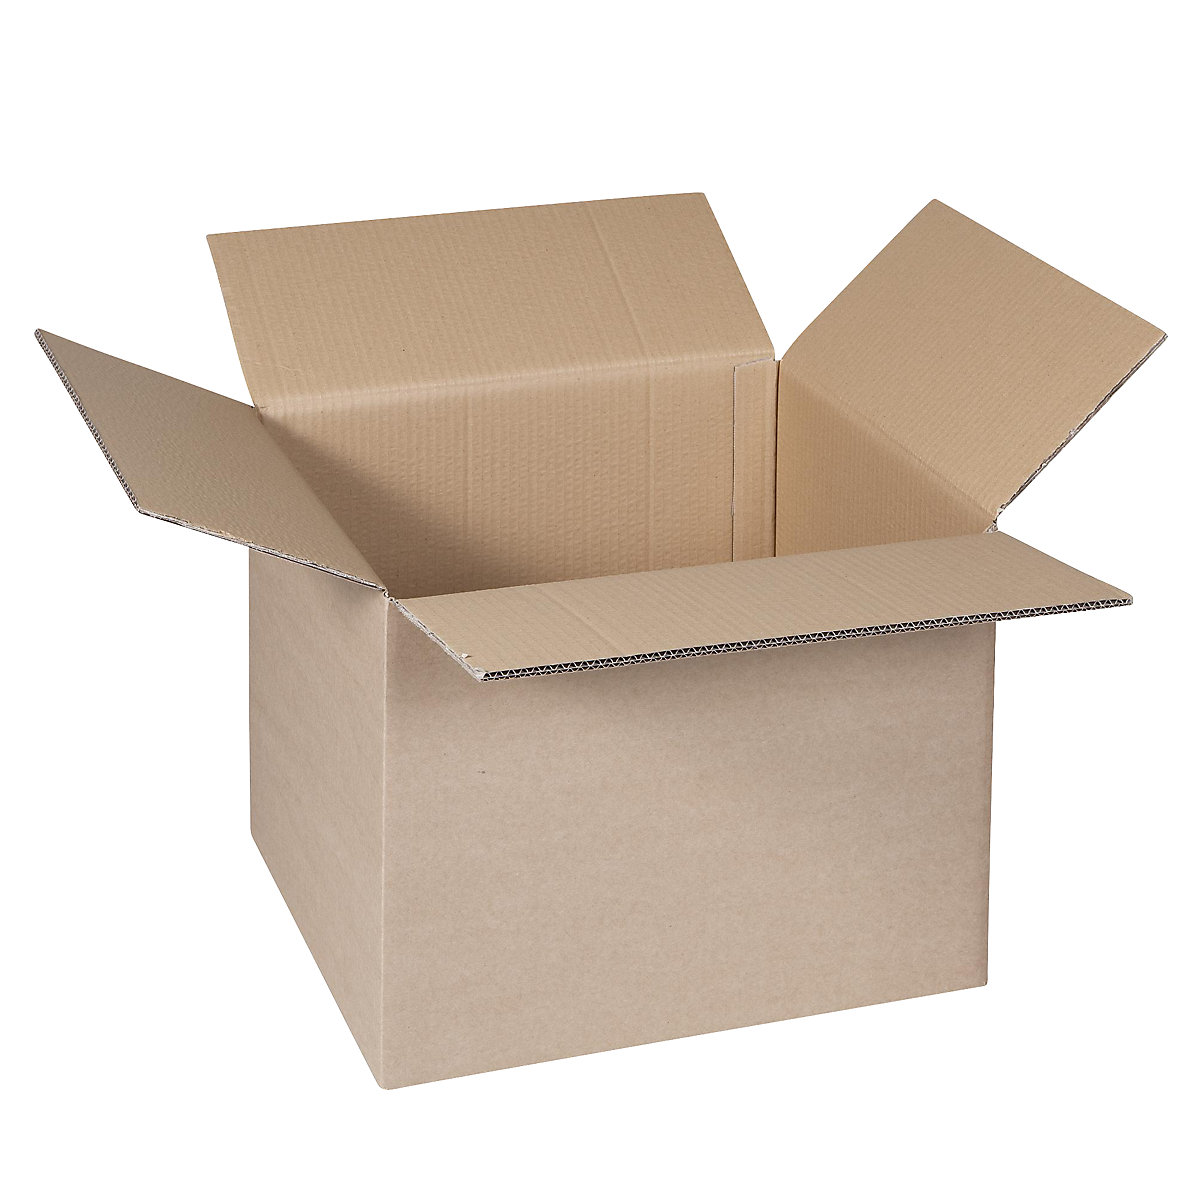 Folding cardboard box, FEFCO 0201, made of double fluted cardboard, internal dimensions 650 x 500 x 450 mm, pack of 50-30